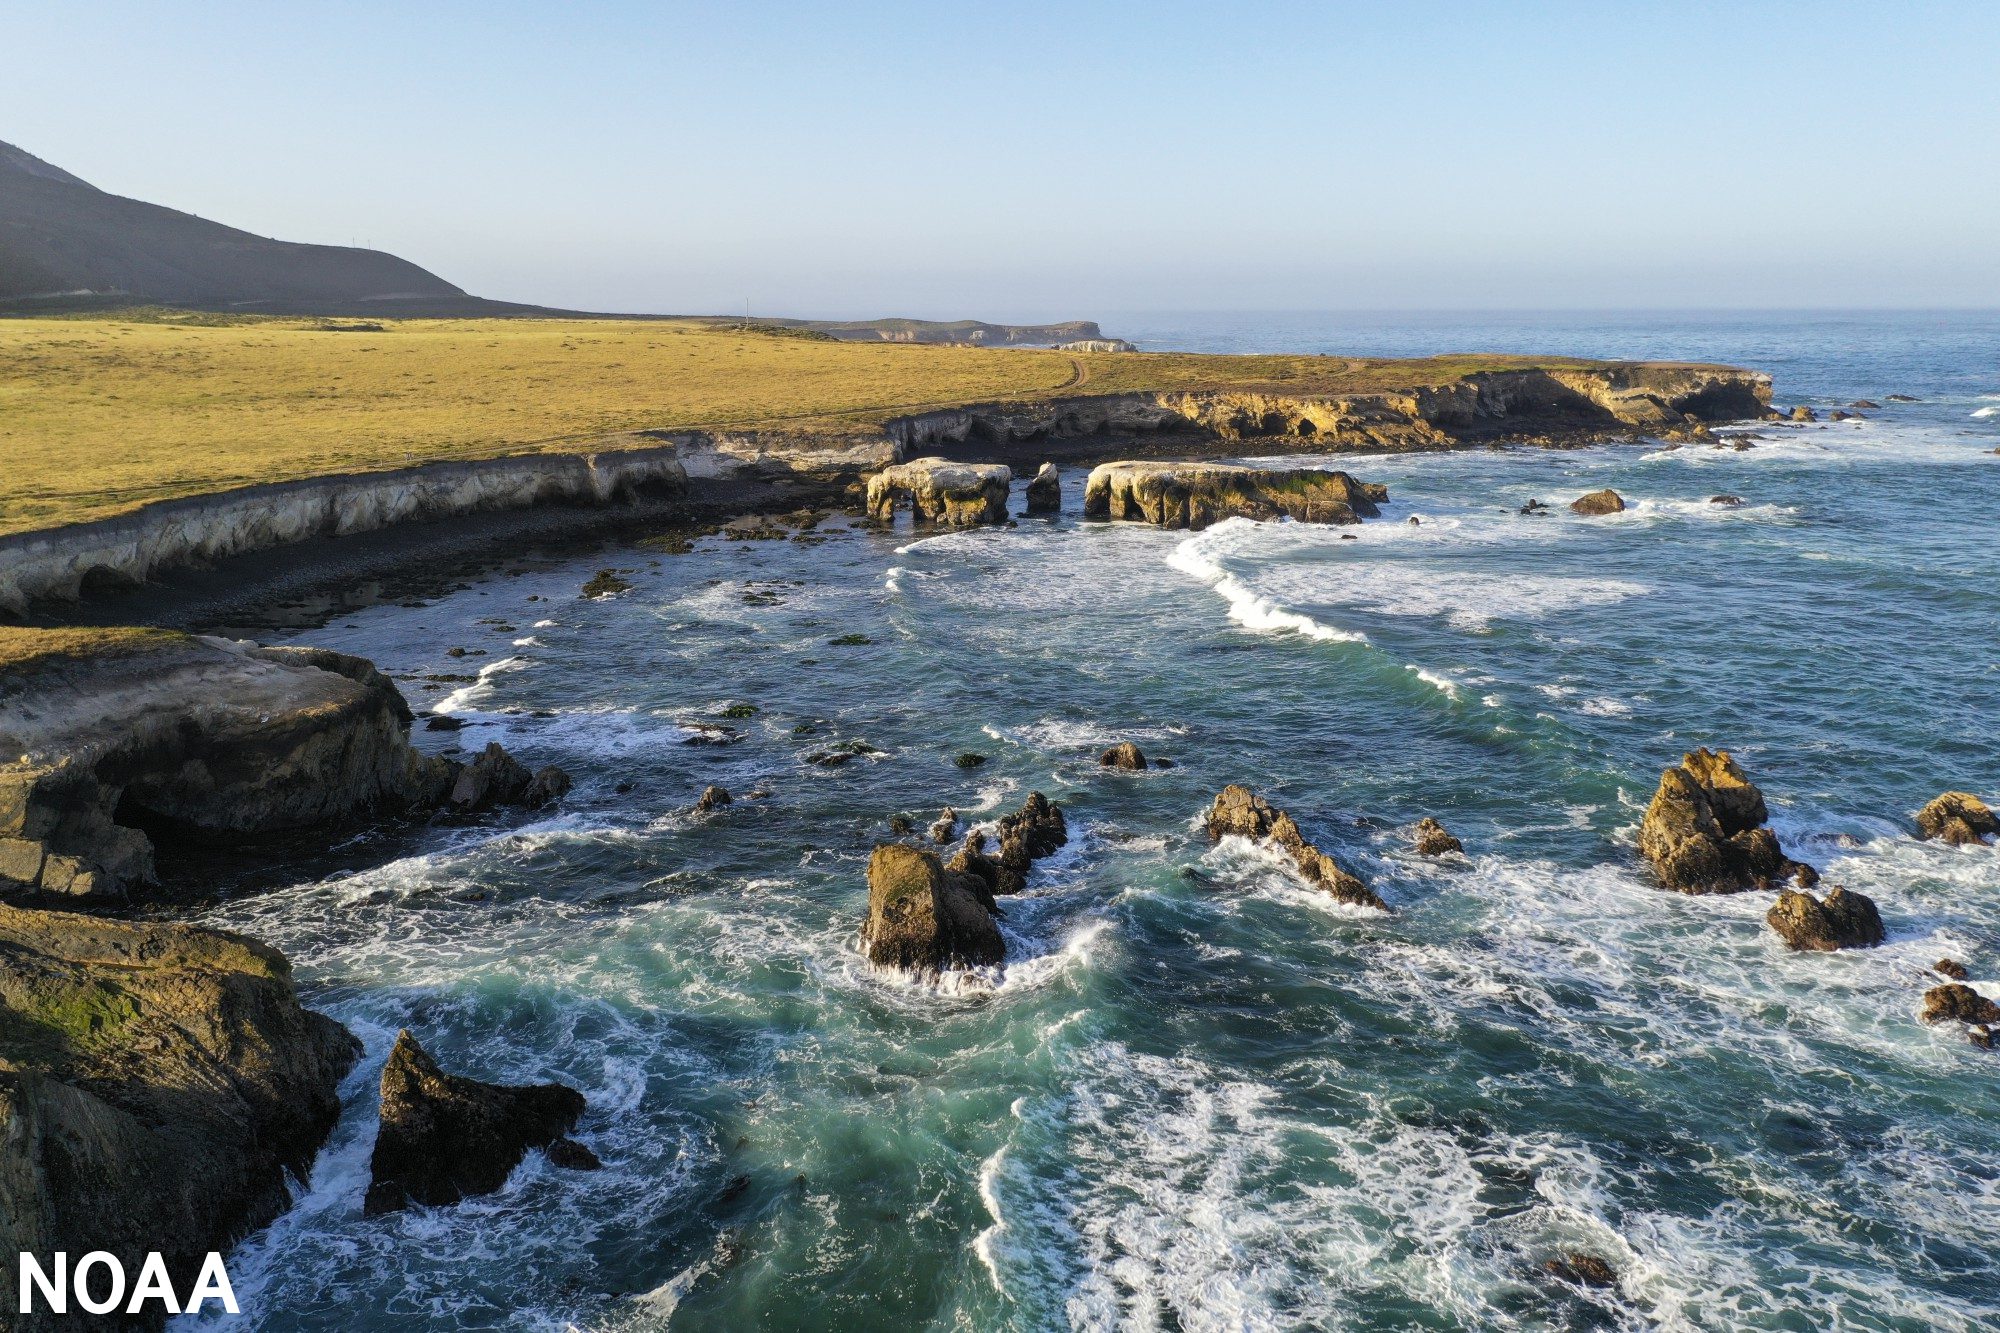 A view of the proposed Chumash Heritage National Marine Sanctuary near Montana de Oro State Park in San Luis Obispo County, California. (Image credit: Robert Schwemmer/NOAA